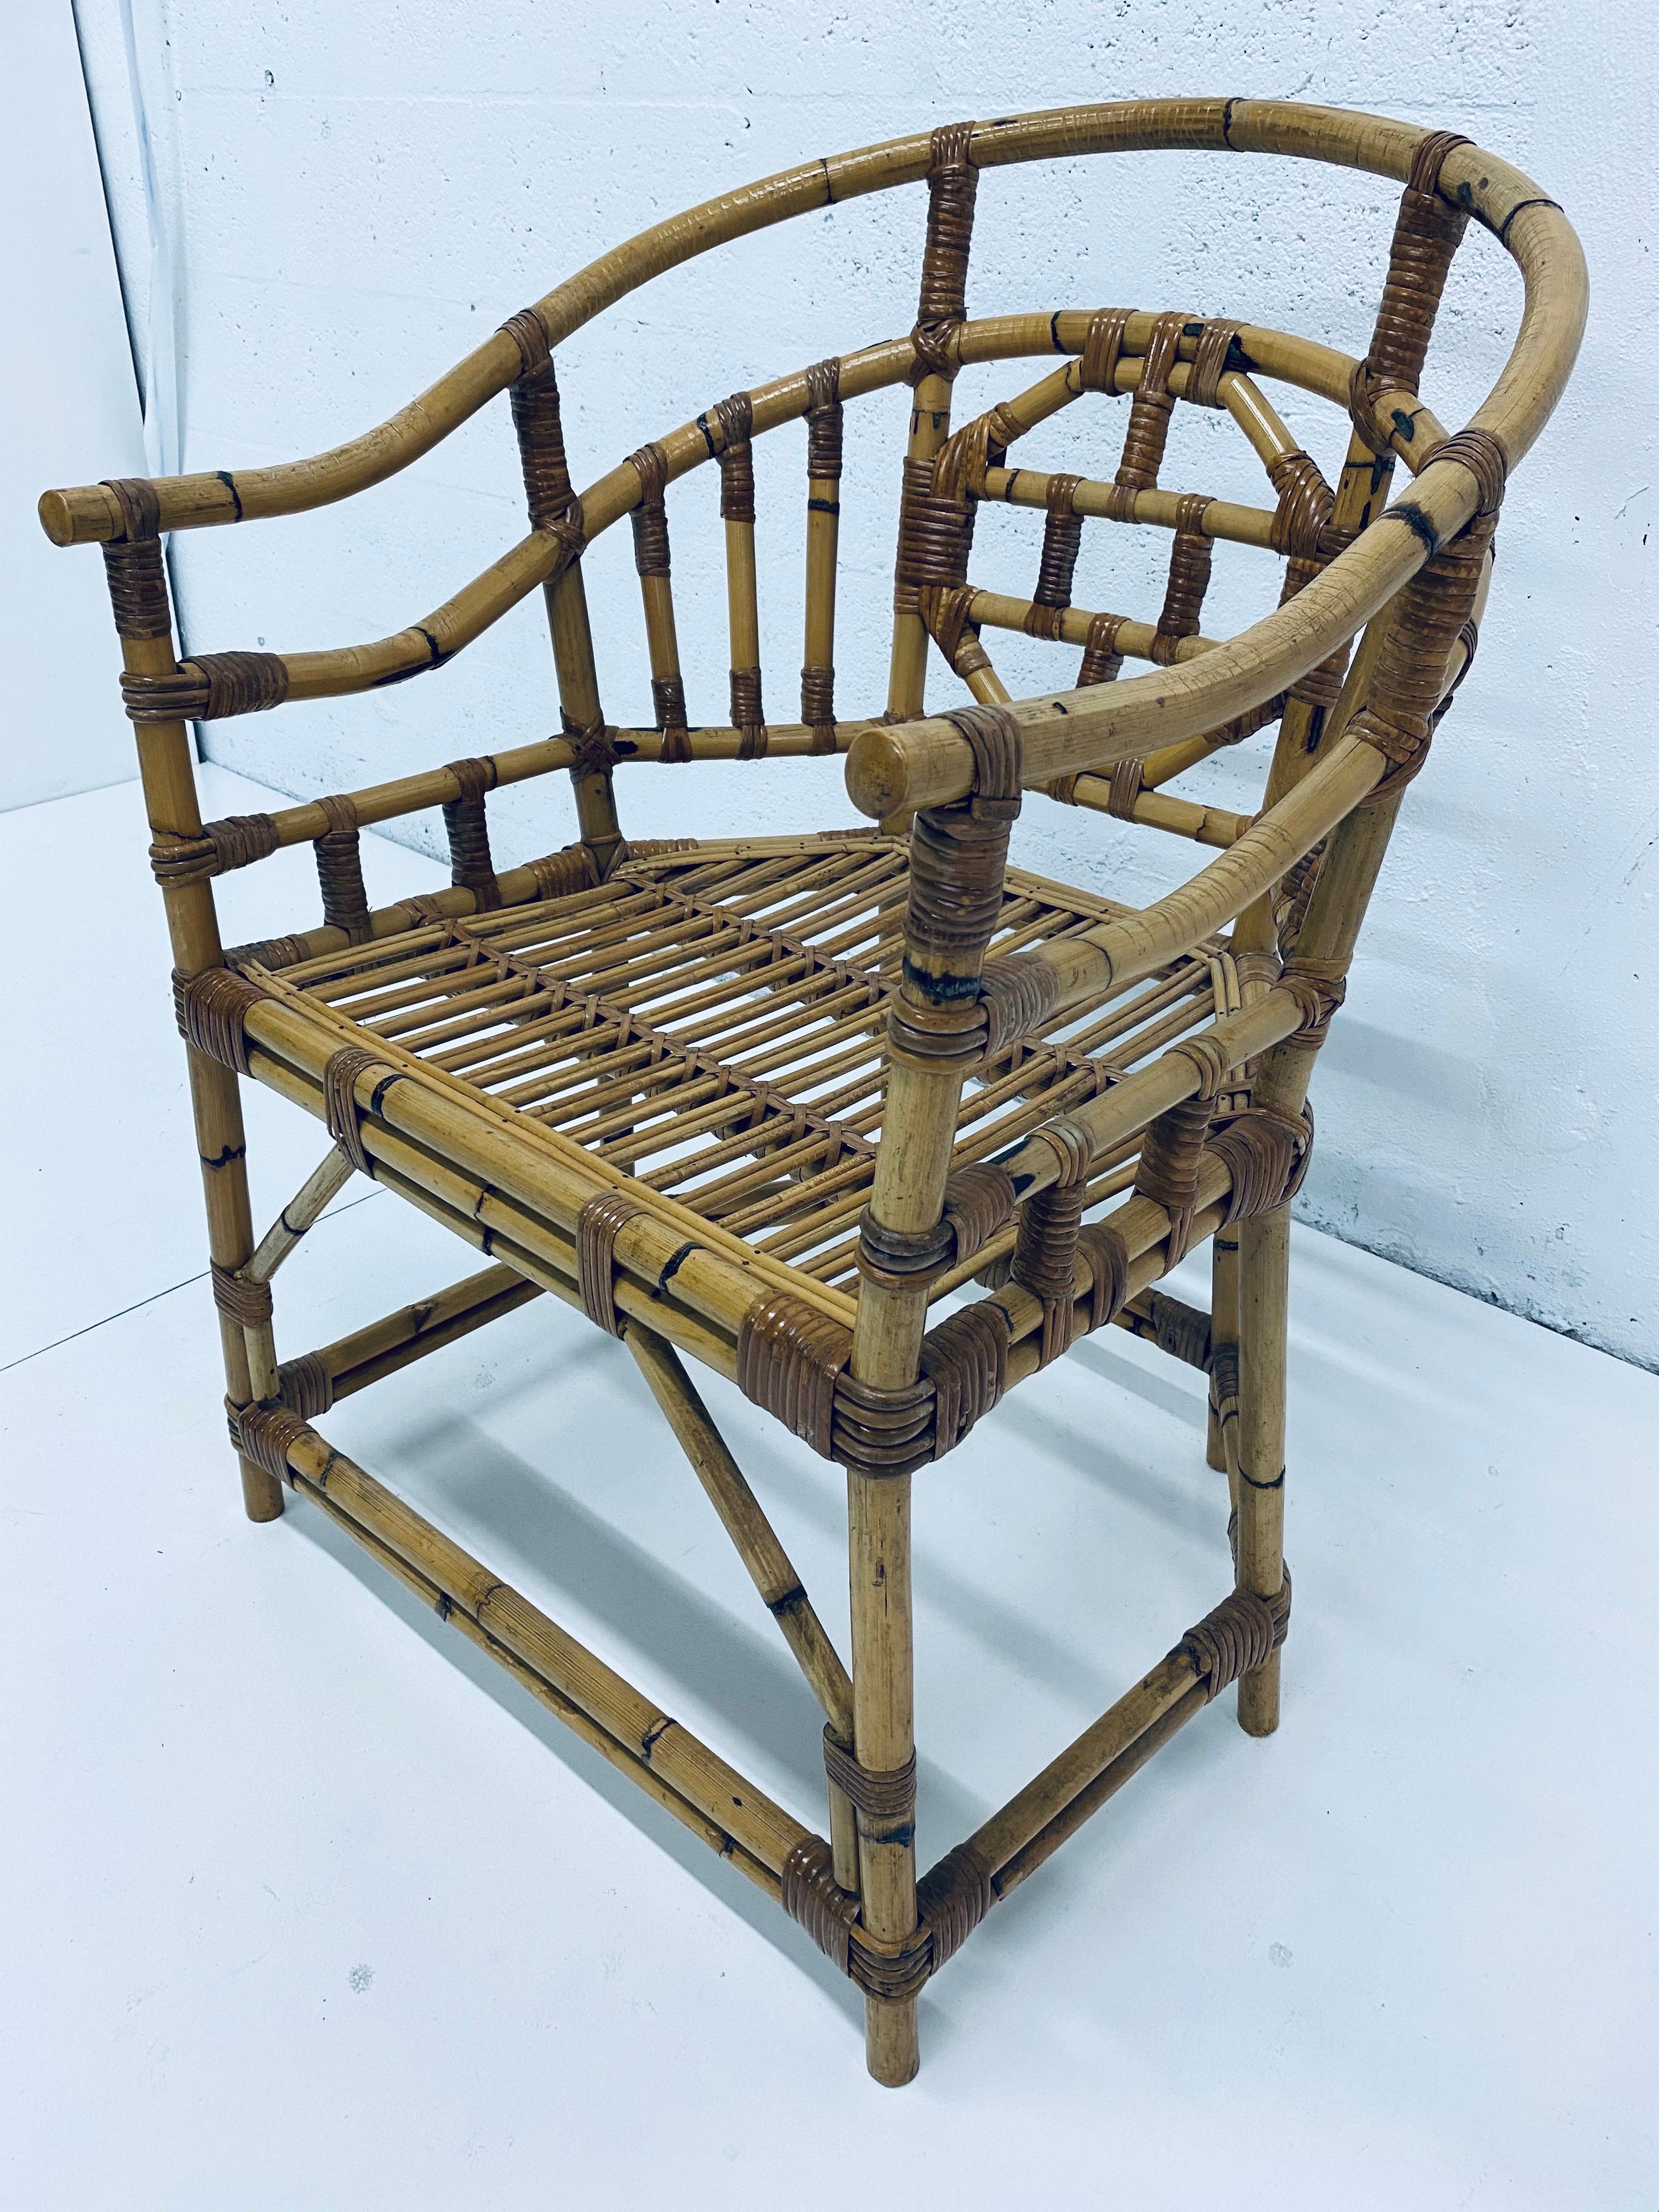 Geometric designed bamboo and rattan armchair in the style of Brighton Pavilion from the 1970s.